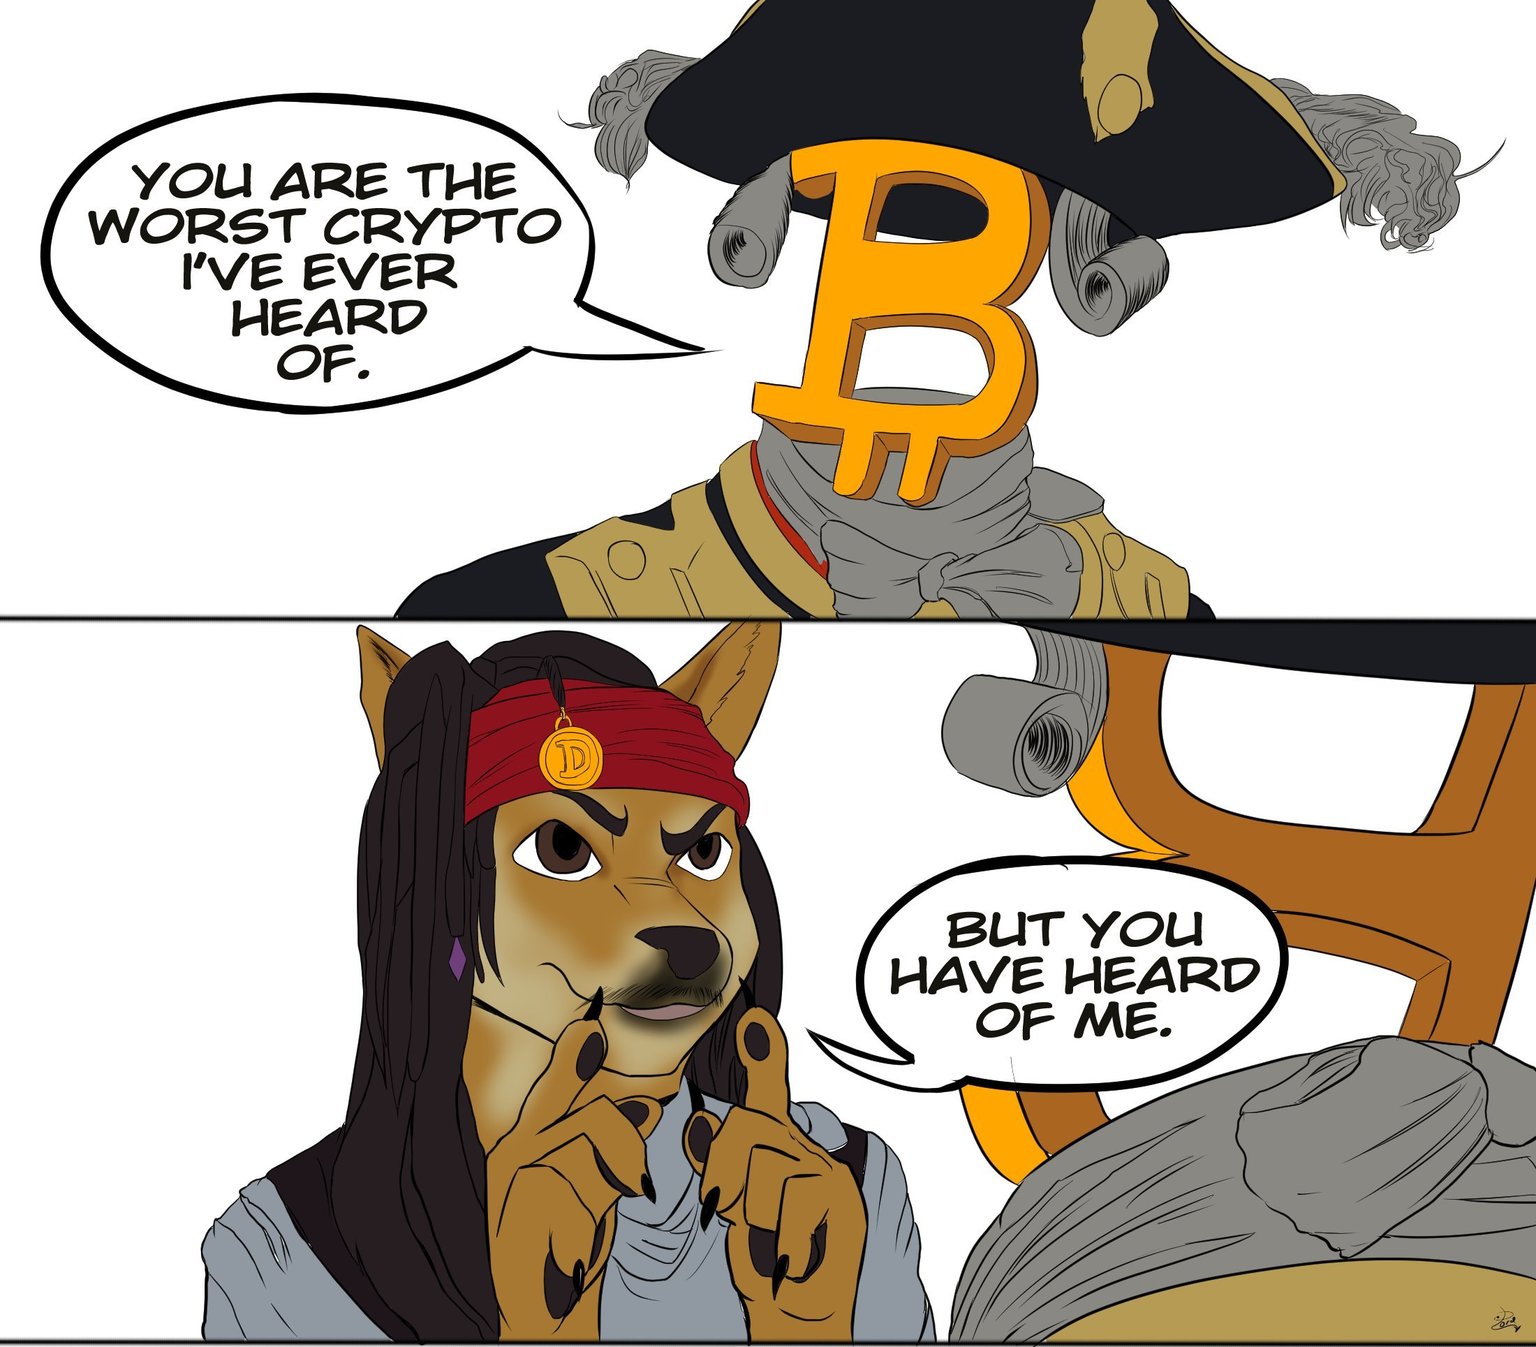 Dogecoin is pretty cool - meme